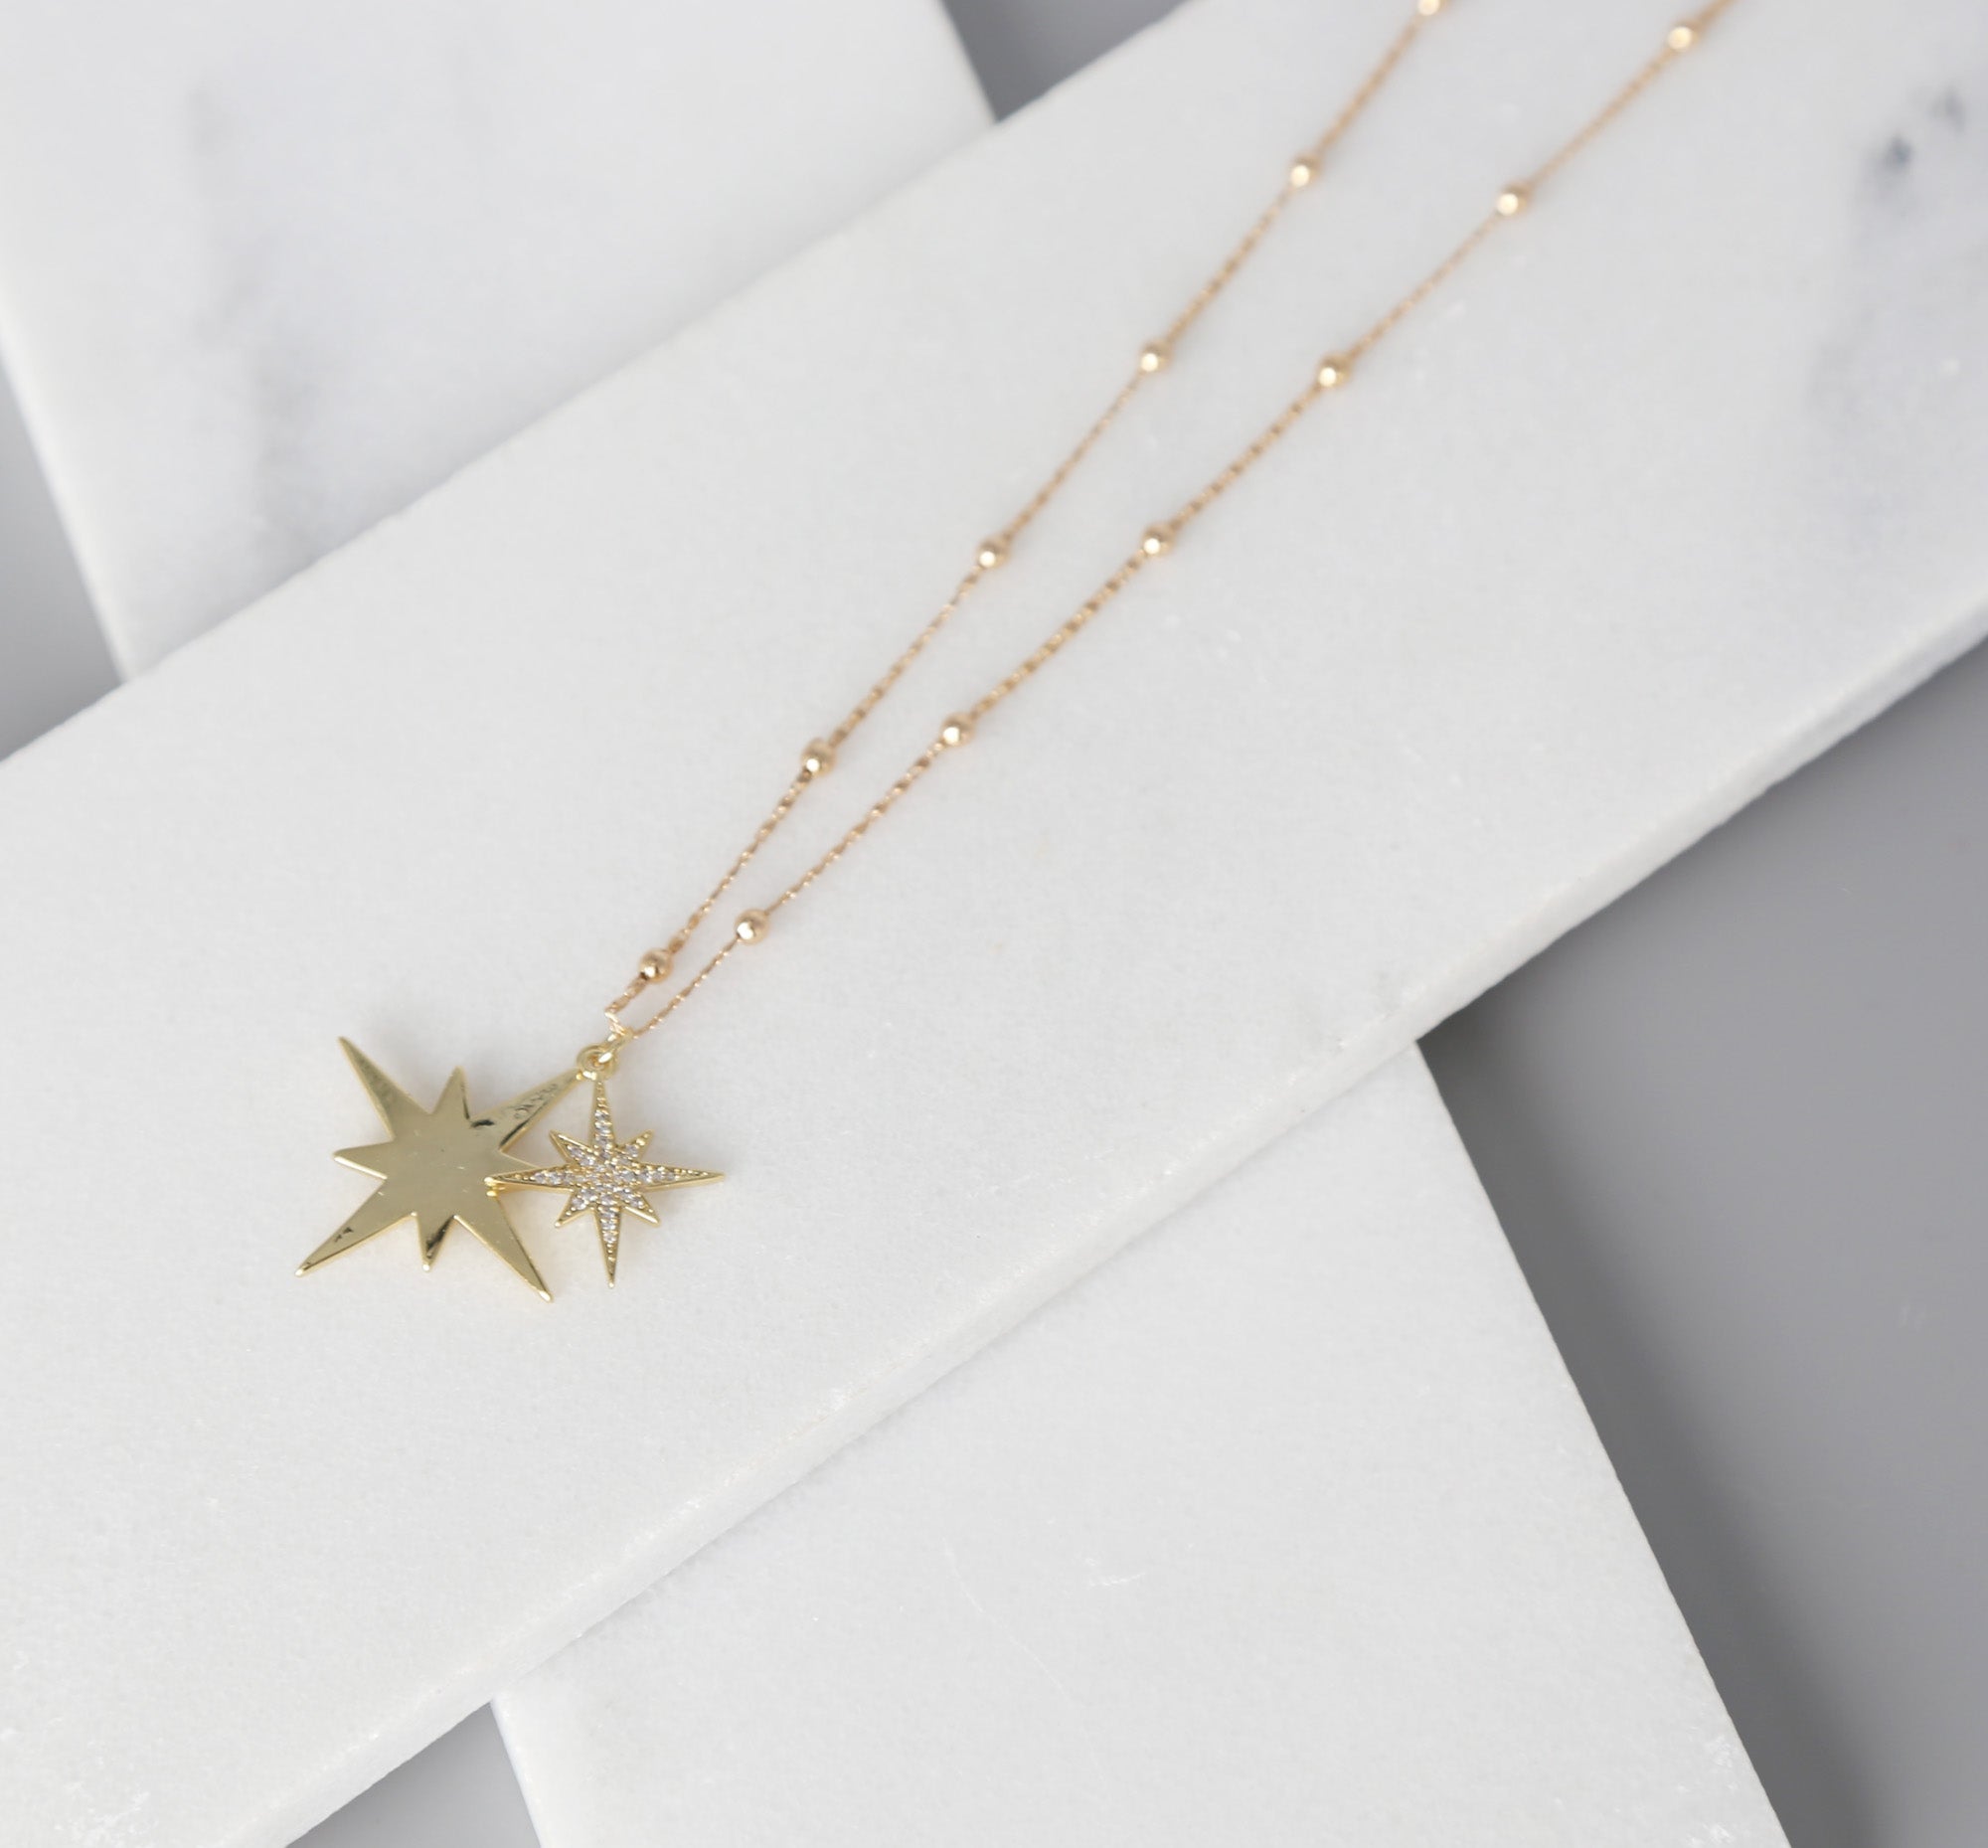 Double Shooting Star Necklace, Gold Necklace, Dainty Gold Jewelry, Celestial, Gold Chain, Luminous Collection